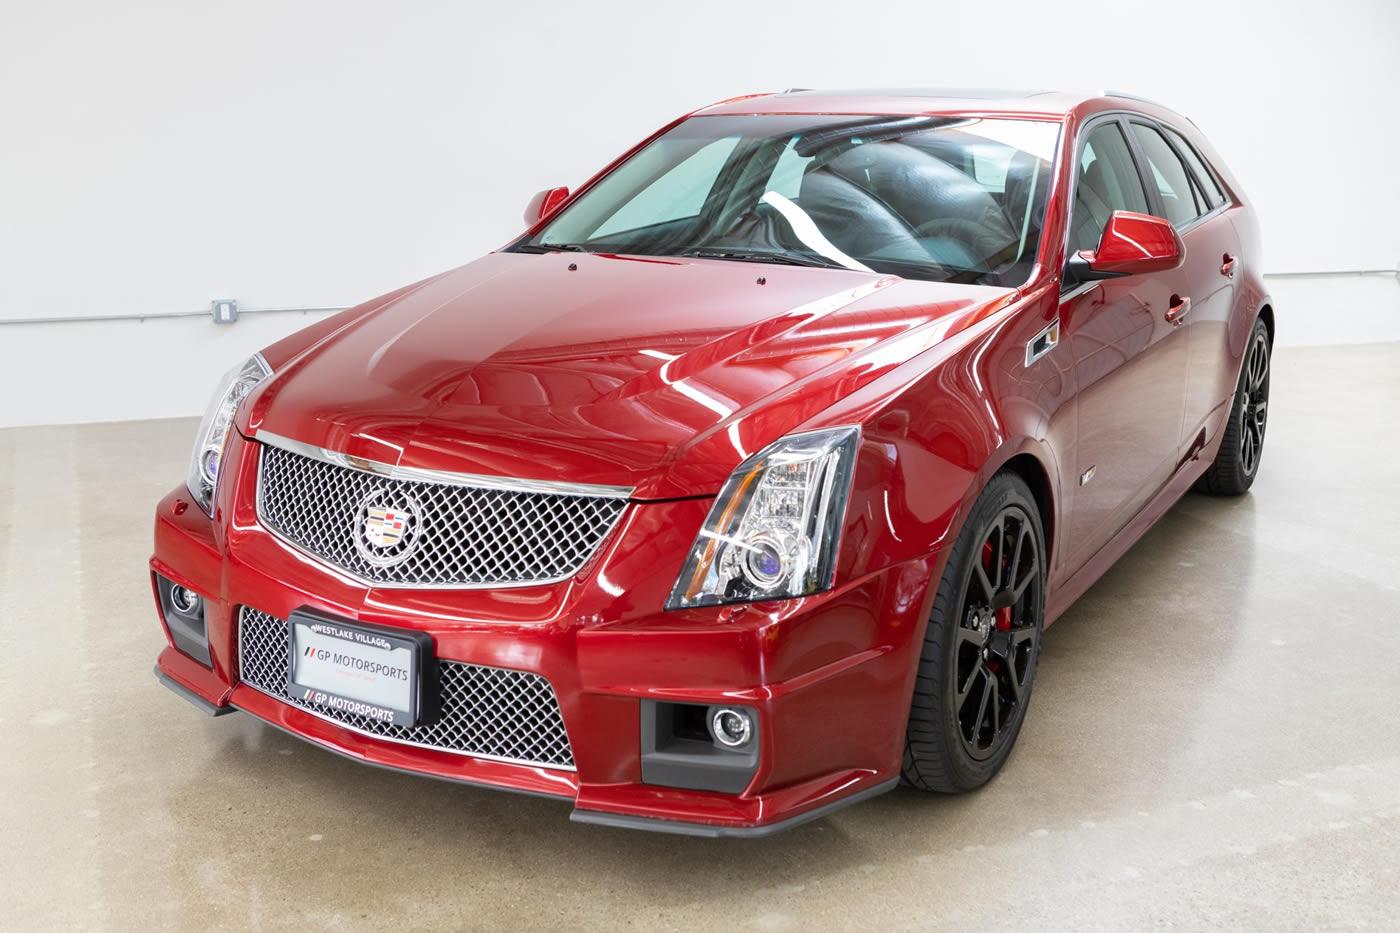 2014 Cadillac CTS-V Wagon in Red Obsession Tintcoat  Cadillac V-Series  Forums - For Owners and Enthusiasts